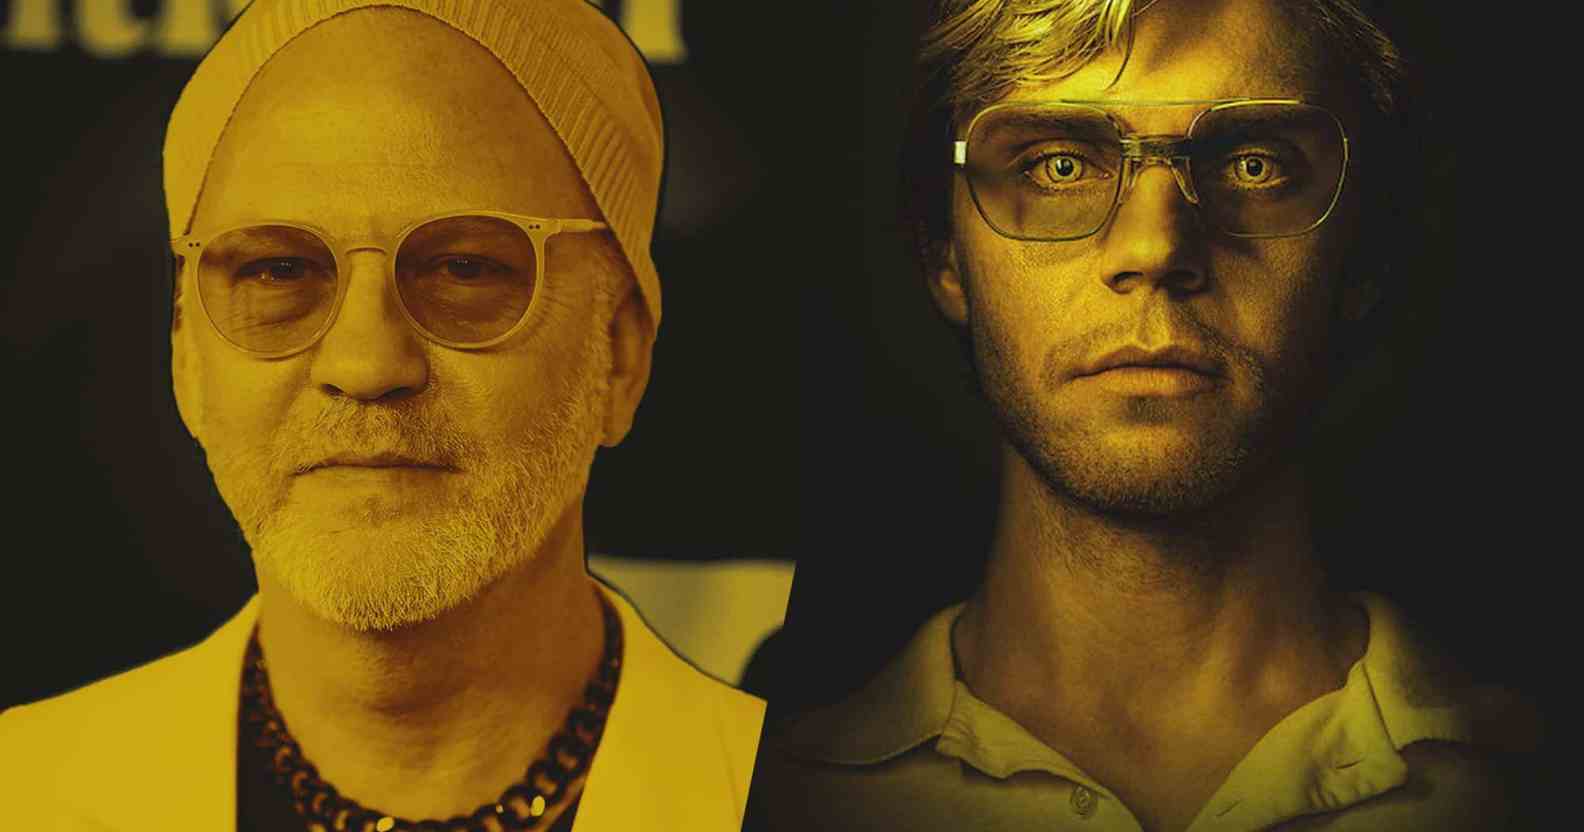 A side-by-side image showing TV creator Ryan Murphy on the left wearing a white hat, sunglasses and a white suit jacket over a black t-shirt. On the right is a promo shot of actor Evan Peters as Jeffrey Dahmer from Netflix series Monster: The Jeffrey Dahmer Story